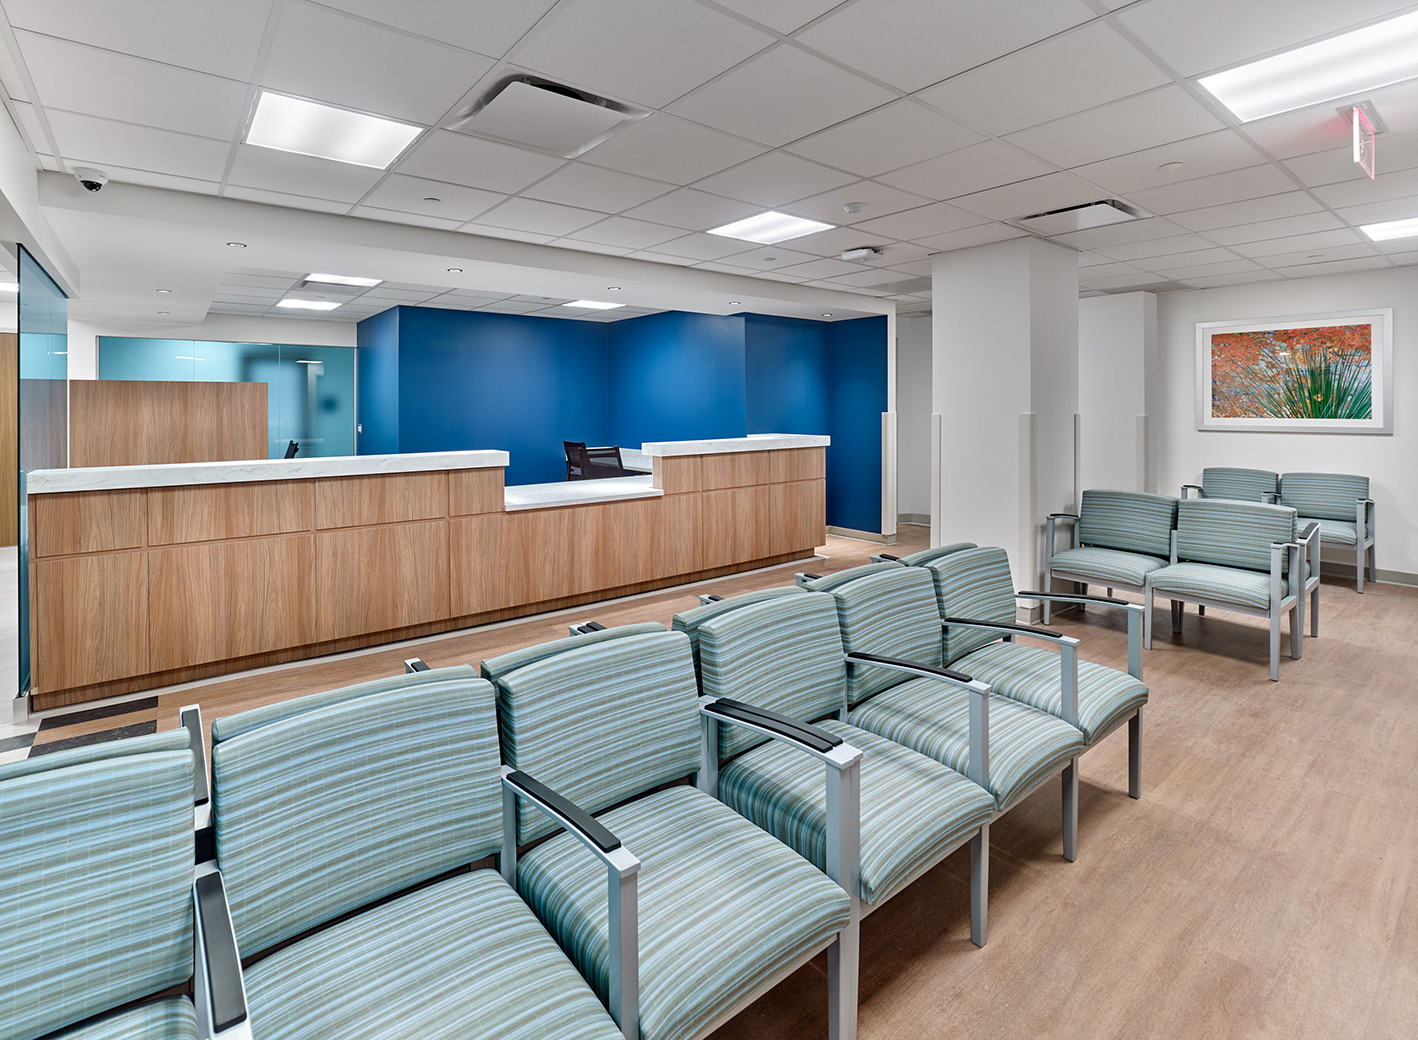 The reception room at ENT and Oral Surgery Suite at Jefferson Health featuring a row of light blue chairs with a wooden reception desks in the back